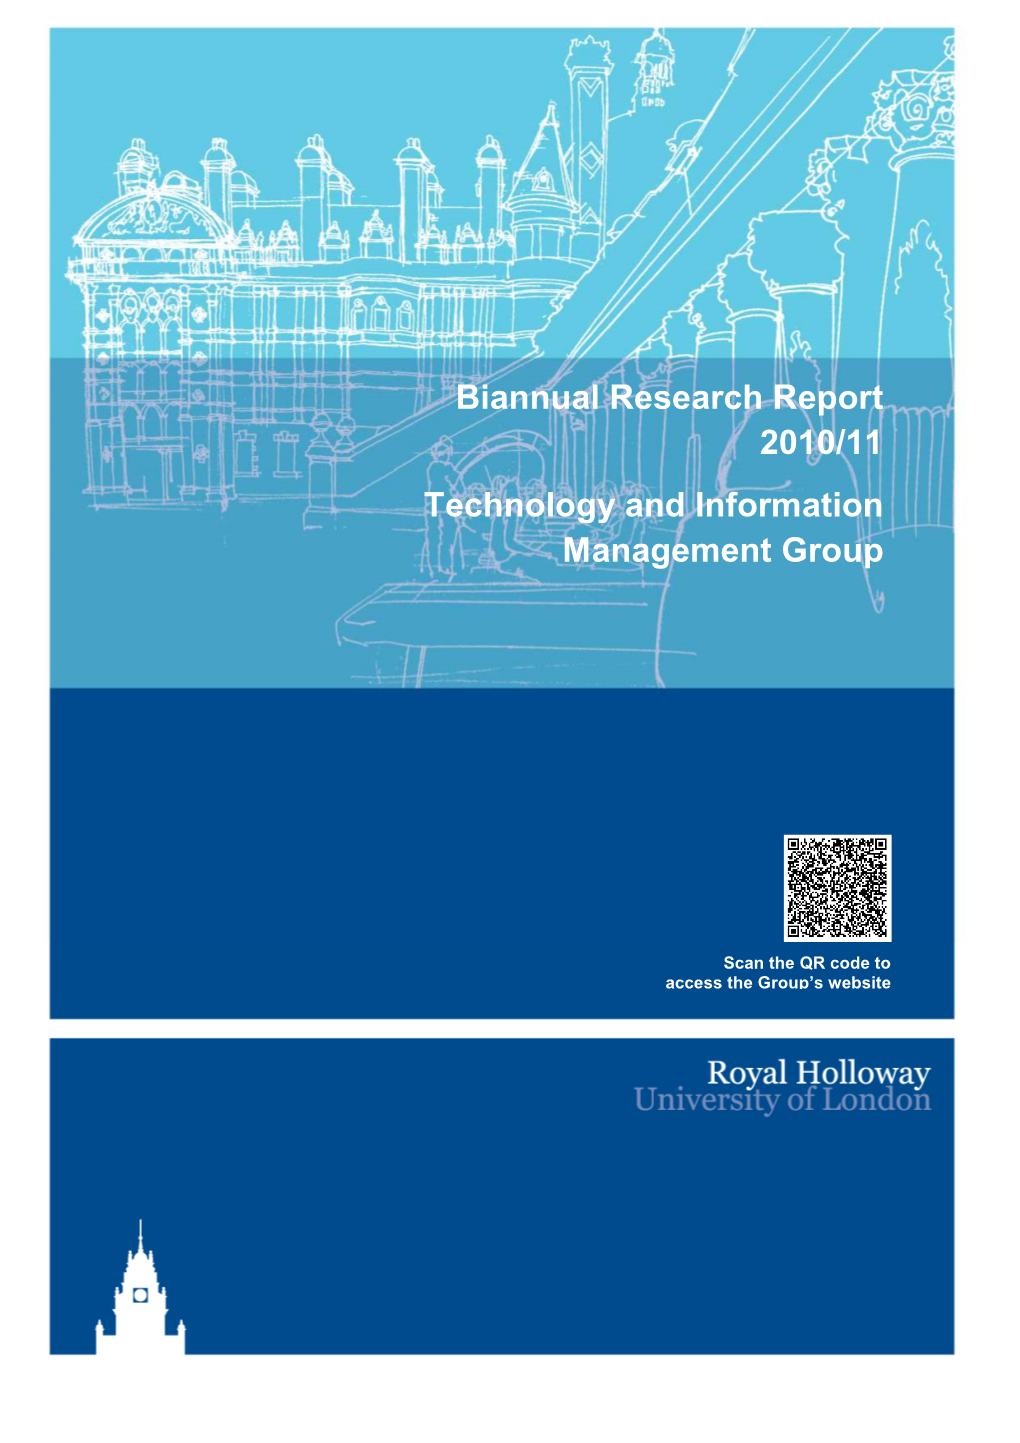 Biannual Research Report 2010/11